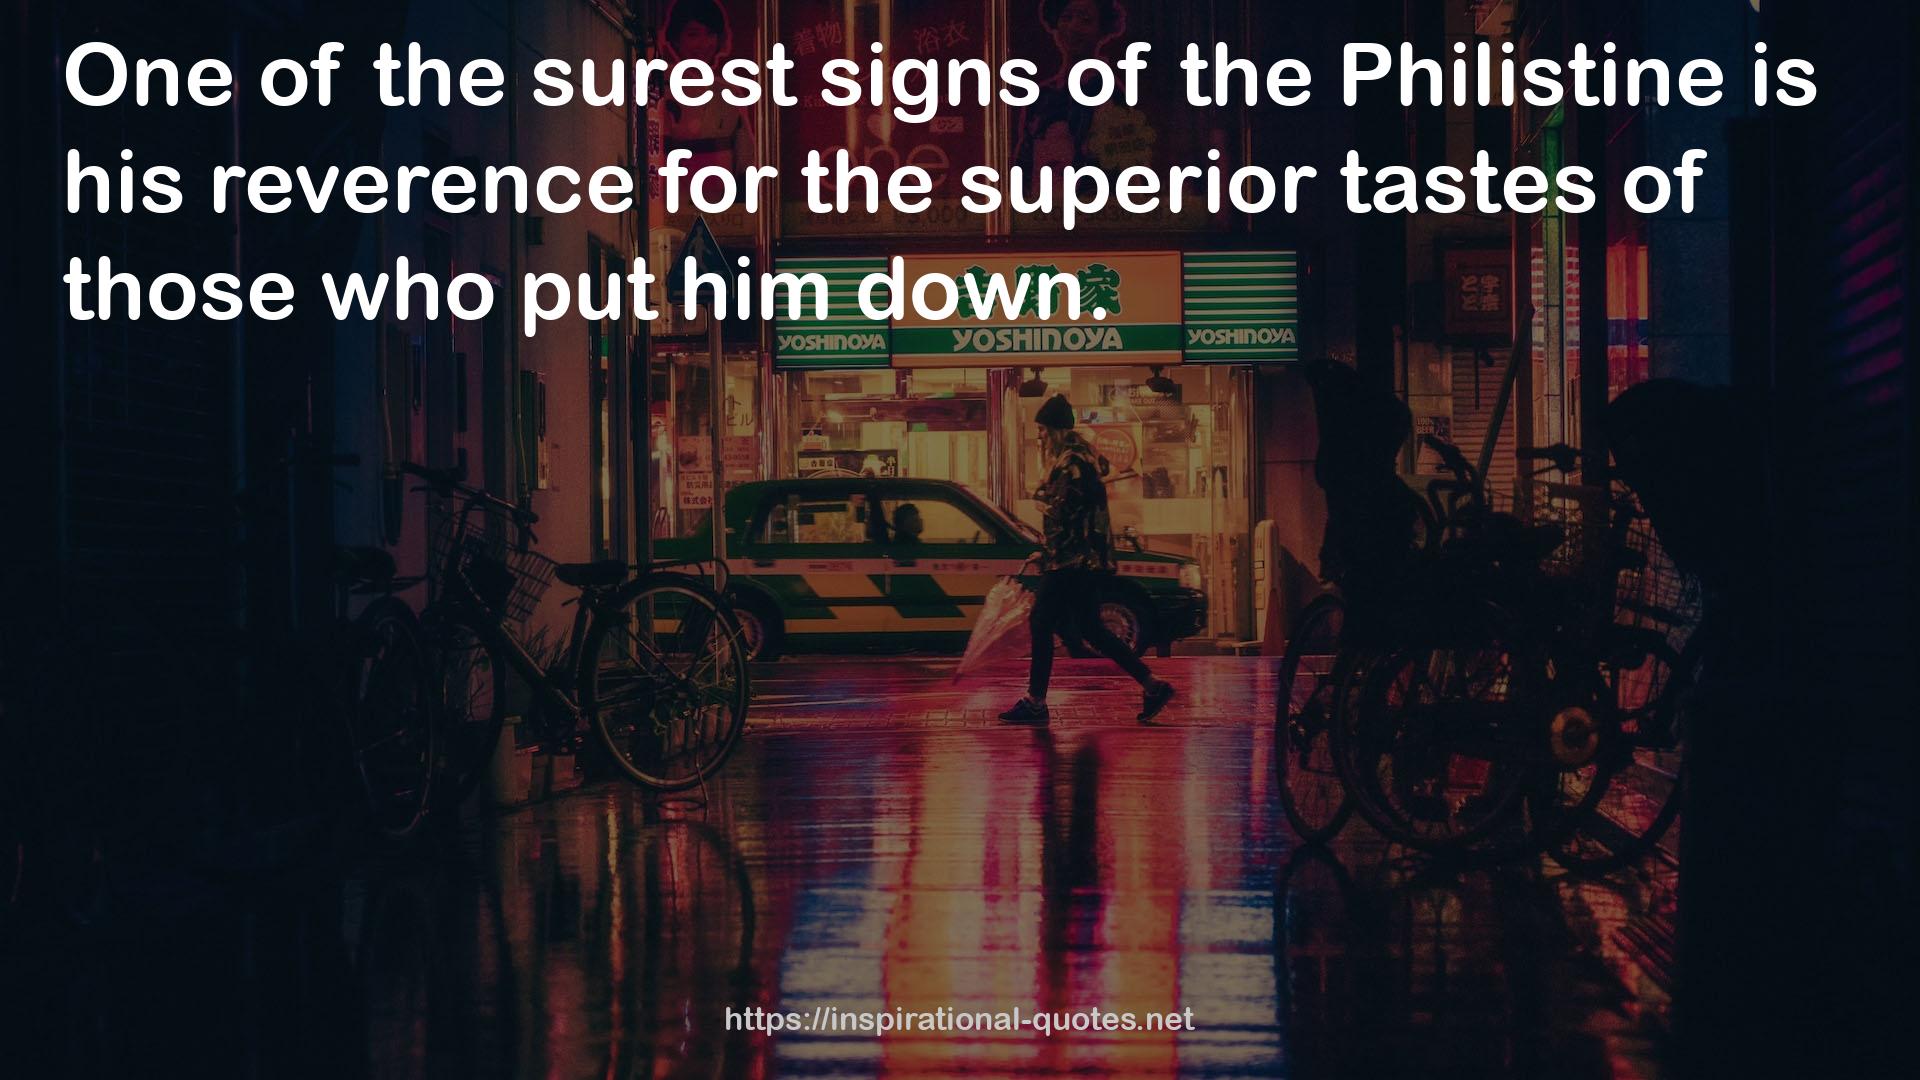 the surest signs  QUOTES